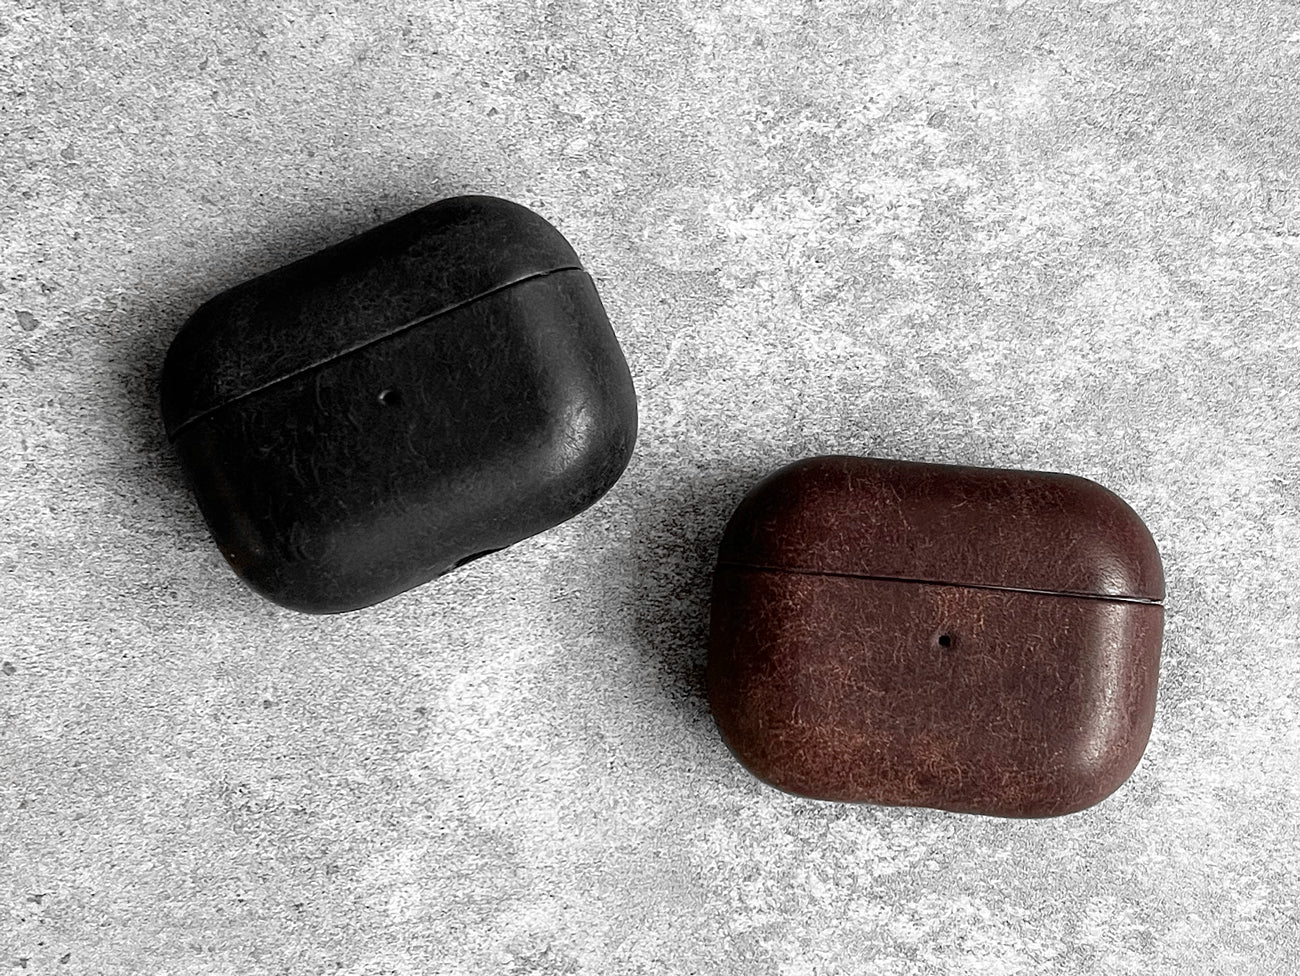 Nomad AirPods Pro Case Leather black